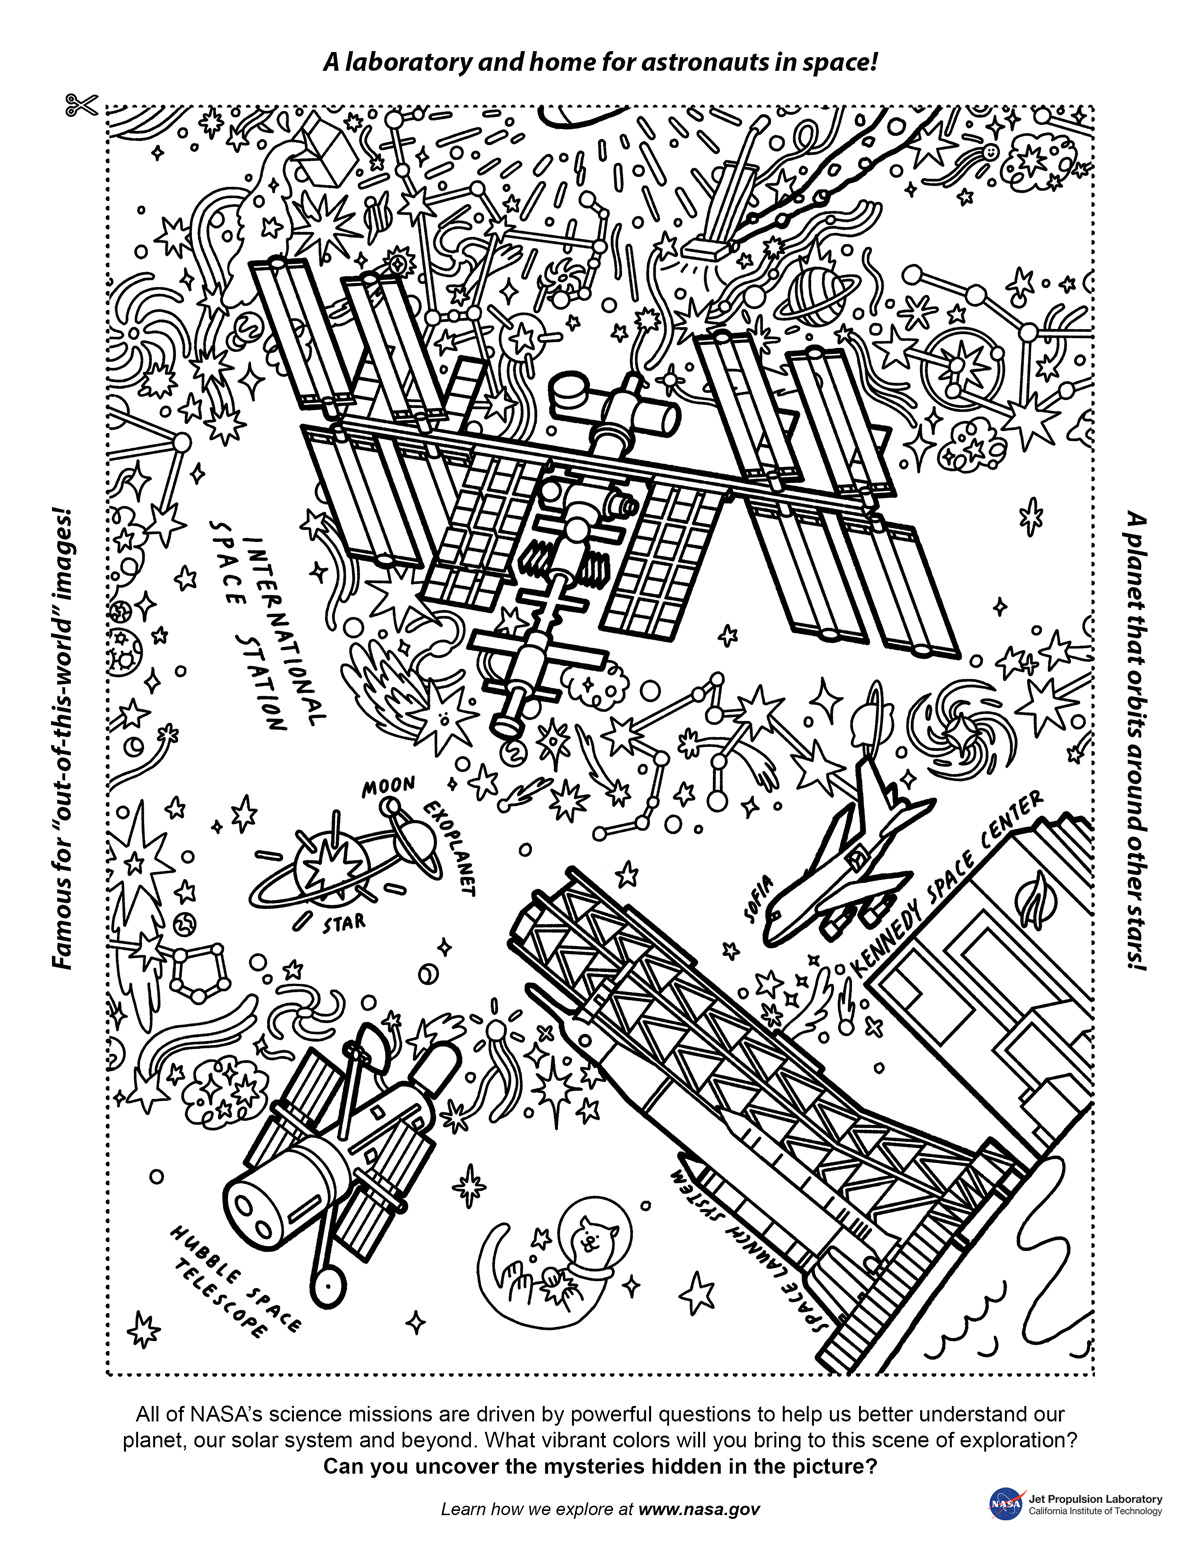 coloring page featuring the International Space Station, Hubble Space Telescope, Kennedy Space Center, and SOFIA